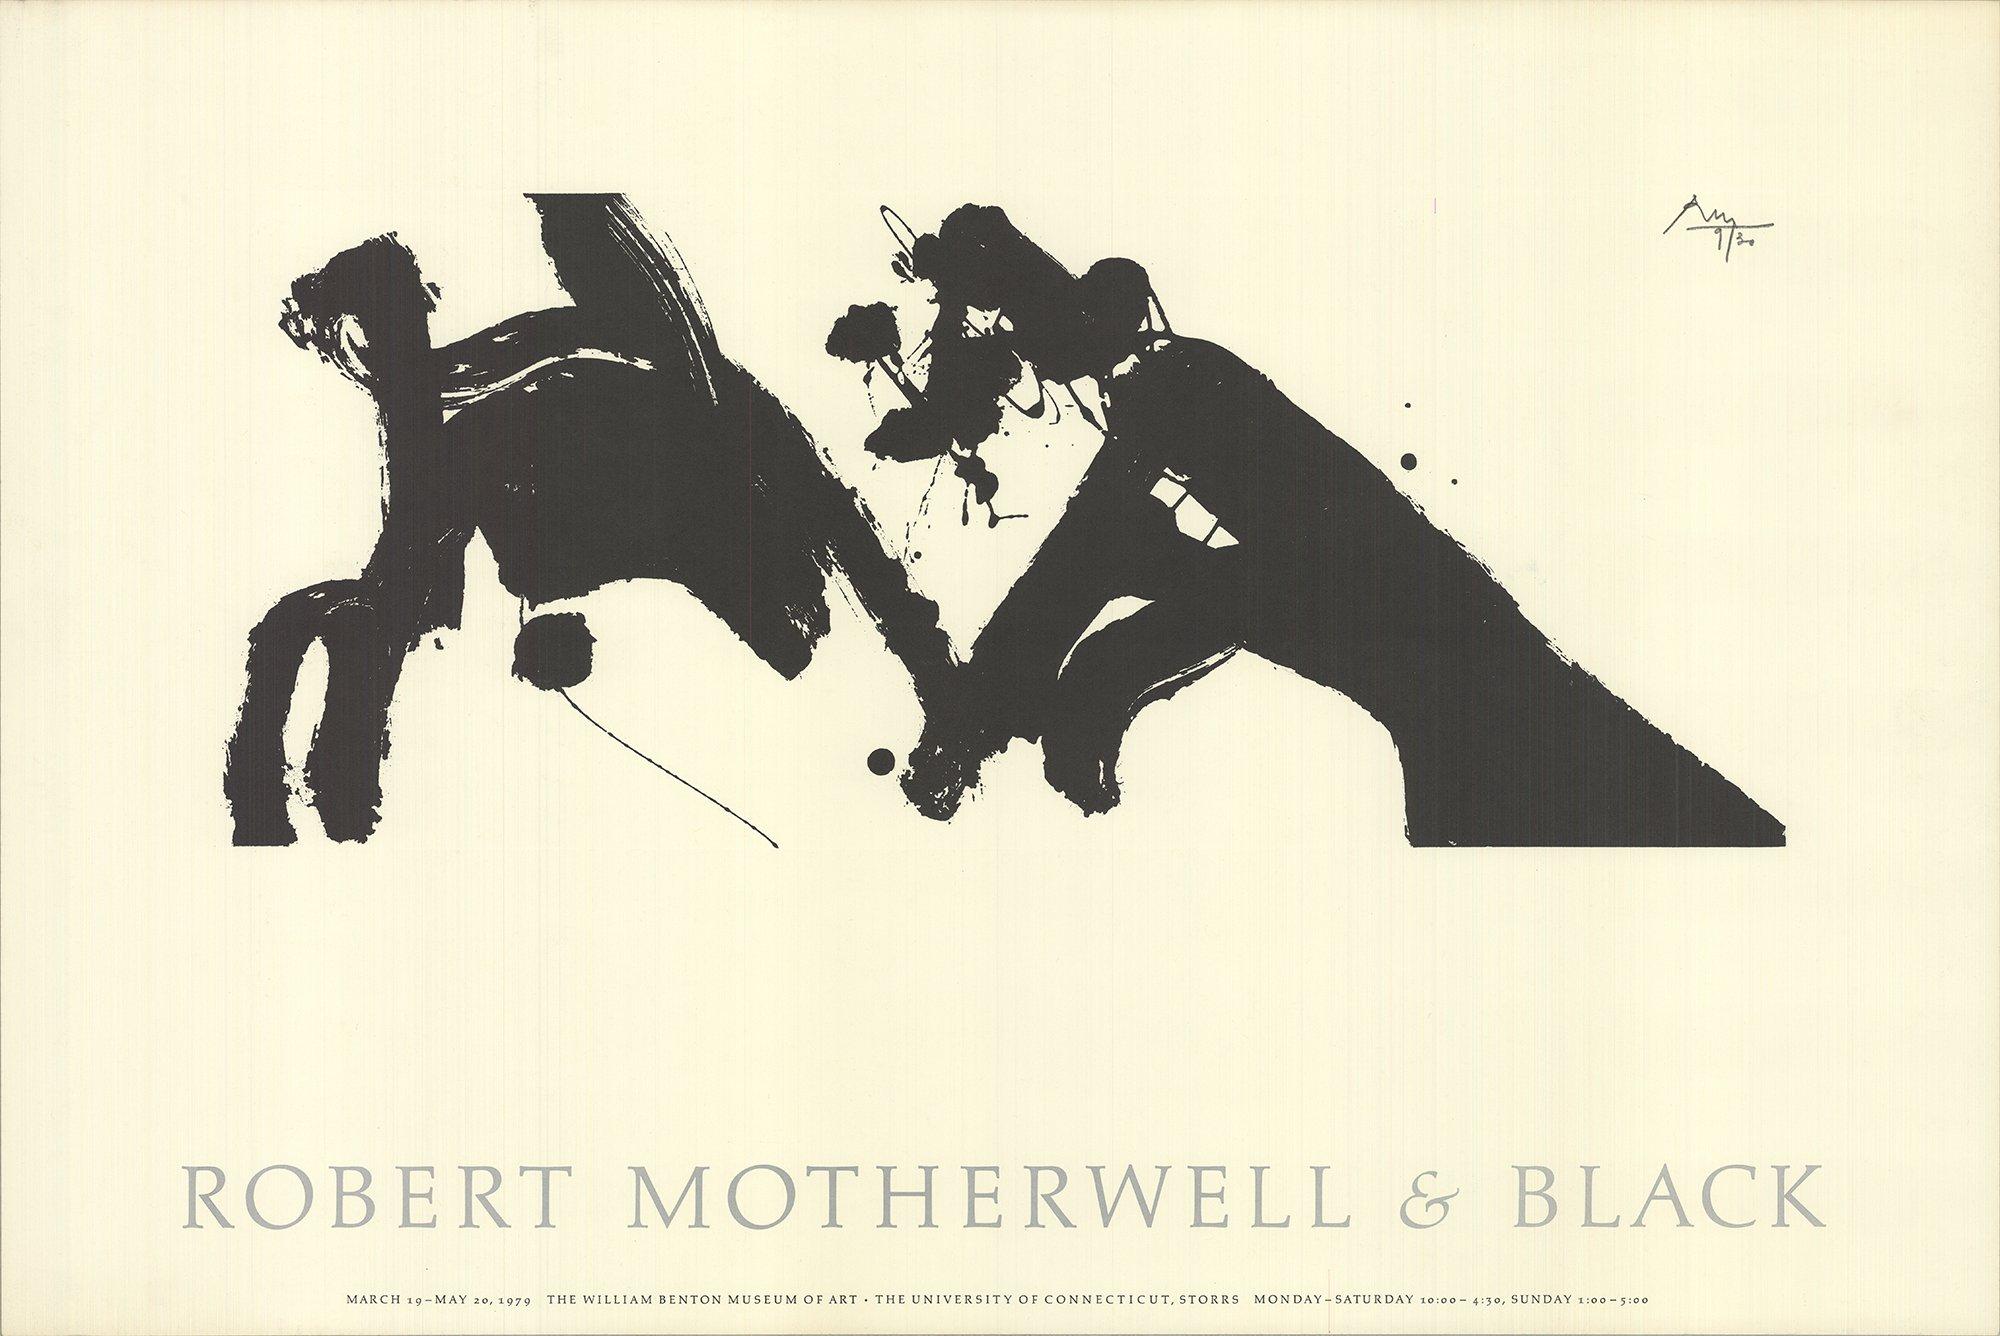 Paper Size: 20 x 30 inches ( 50.8 x 76.2 cm )
 Image Size: 9.75 x 23.5 inches ( 24.765 x 59.69 cm )
 Framed: No
 Condition: A-: Near Mint, very light signs of handling
 
 Additional Details: Exhibition poster for Robert Motherwell: Prints 1977-1979